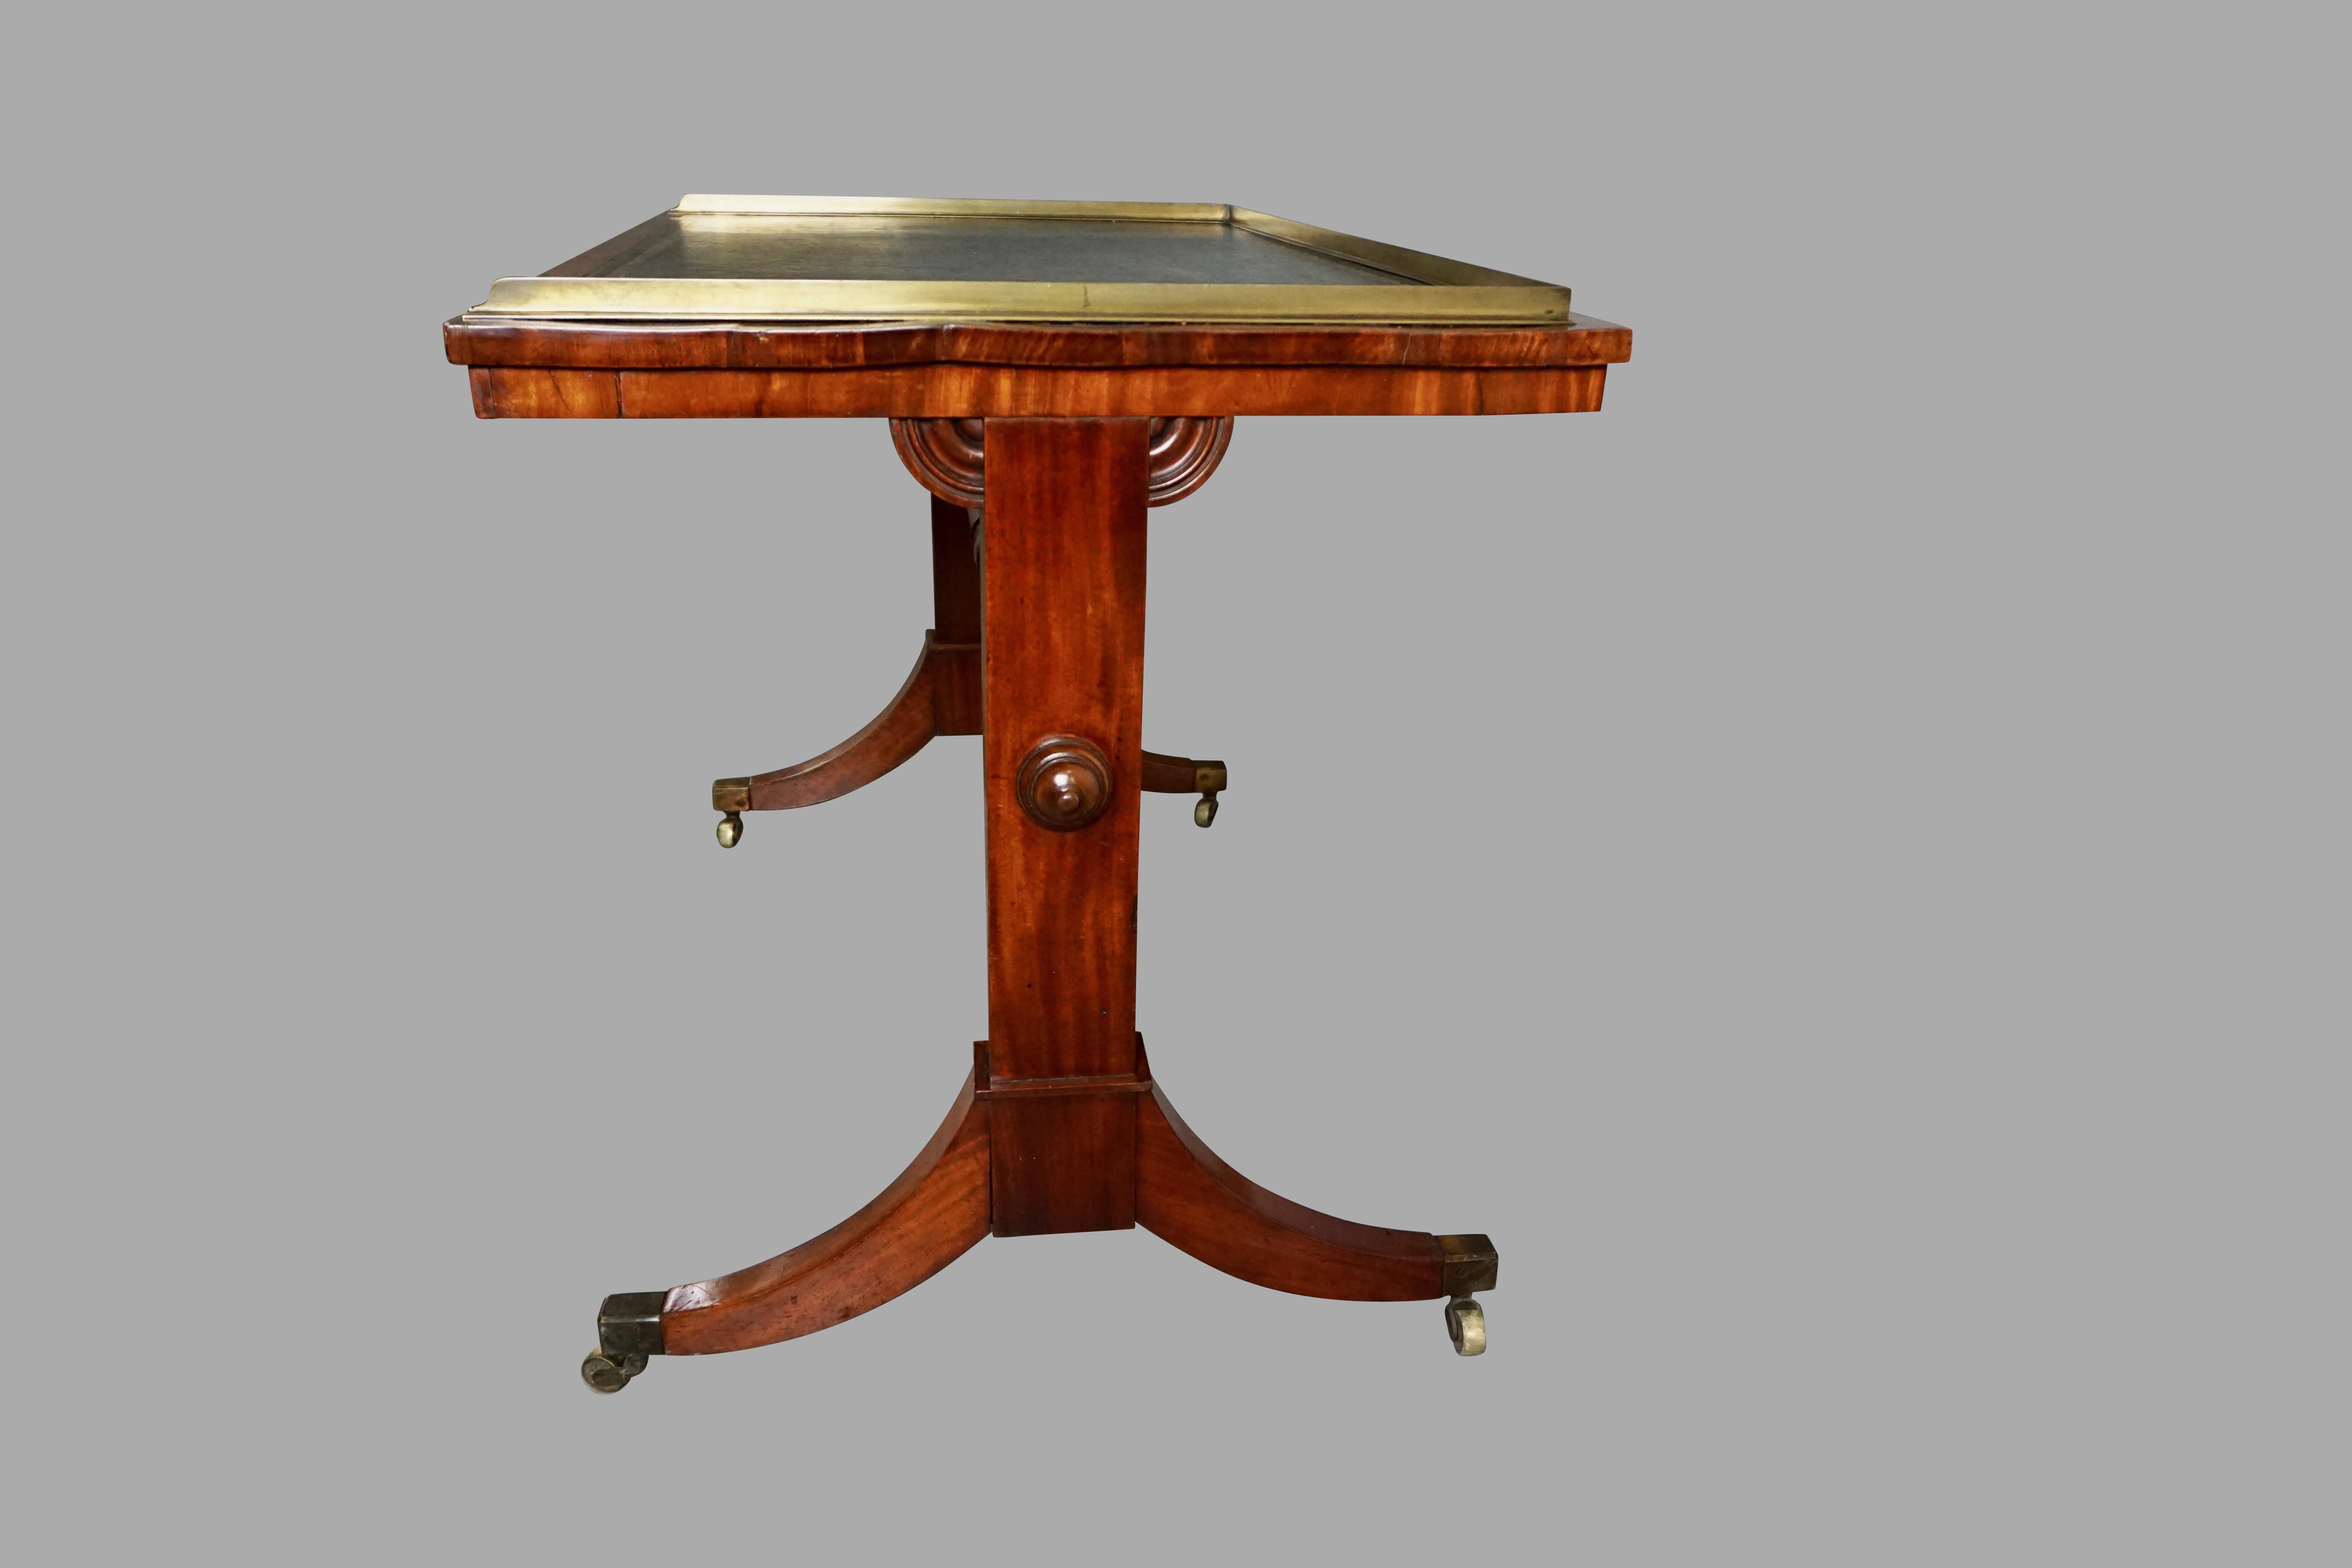 19th Century English Regency Period Writing Table with Brass Gallery and Tooled Leather Top